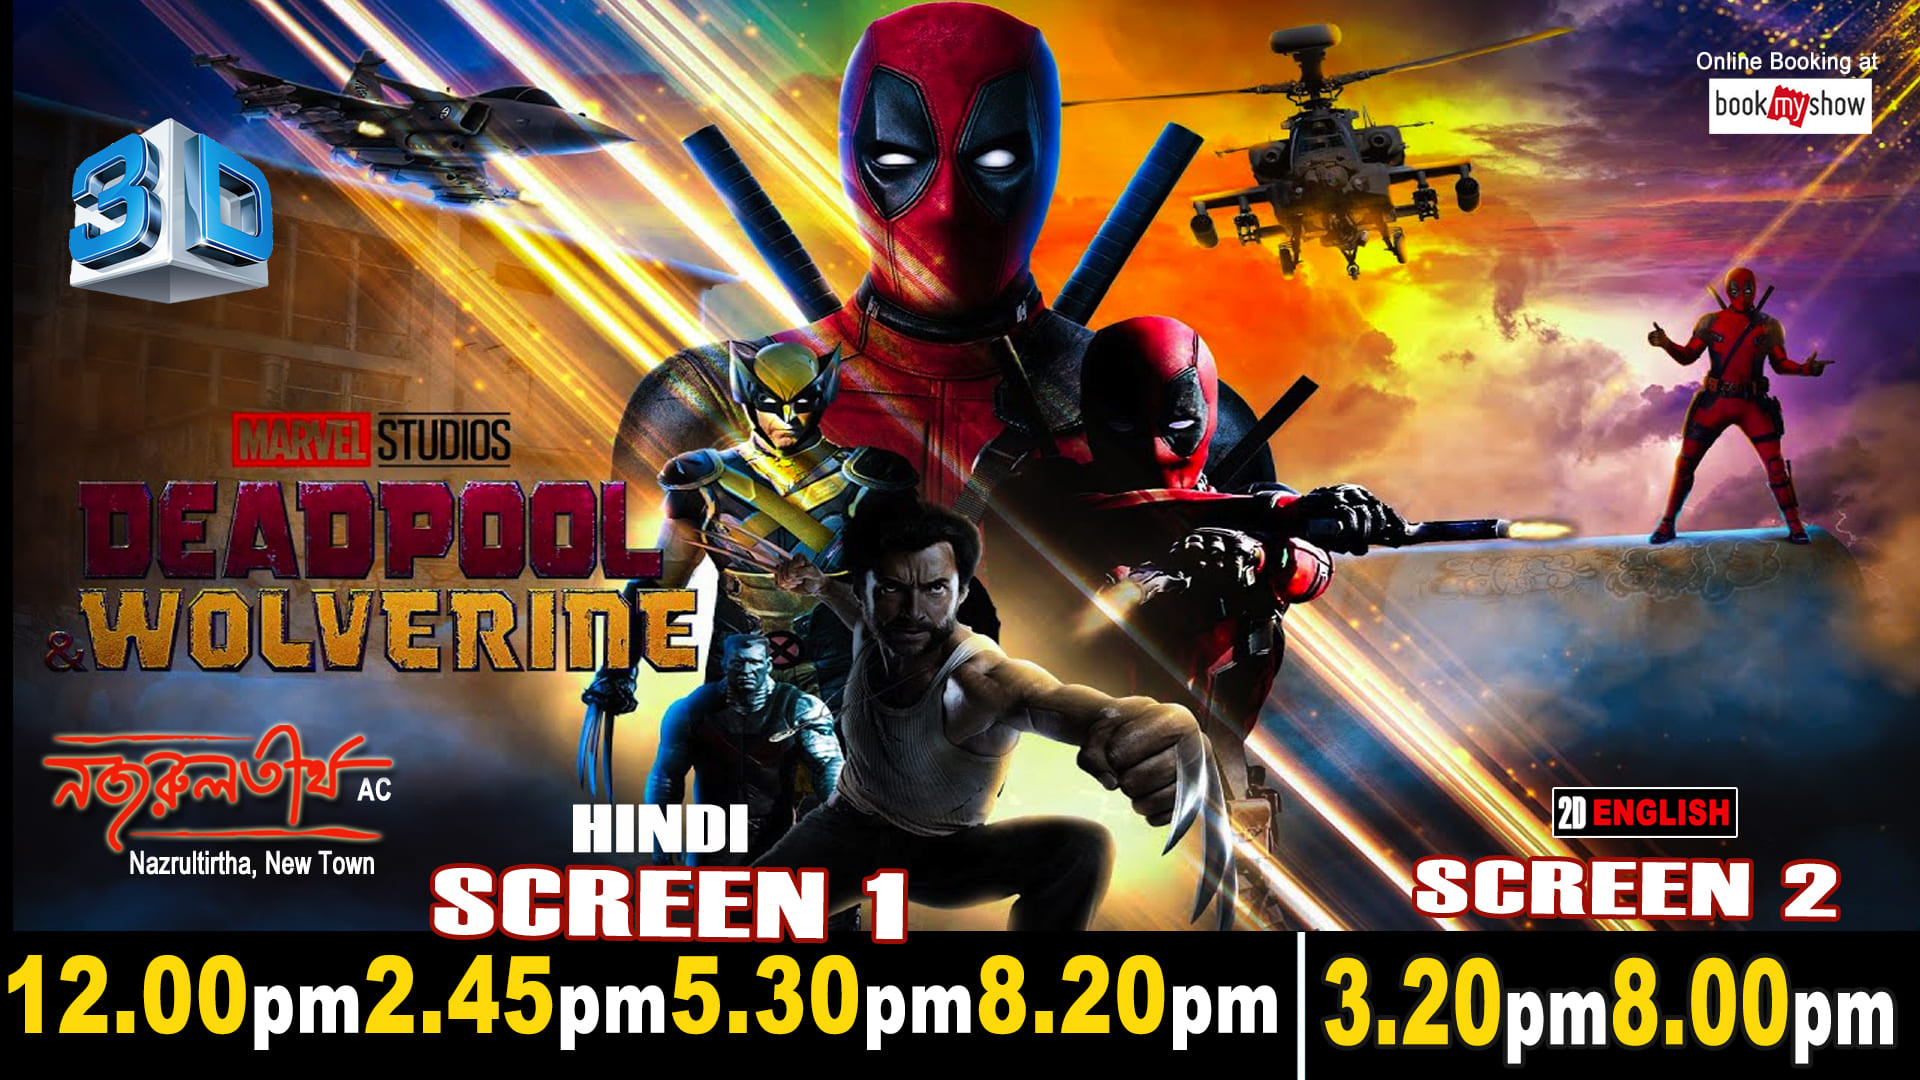 http://nazrultirtha.co.in/upload_file/upcoming_events/DEADPOOL VS WOLVERINE (Hindi 3D)